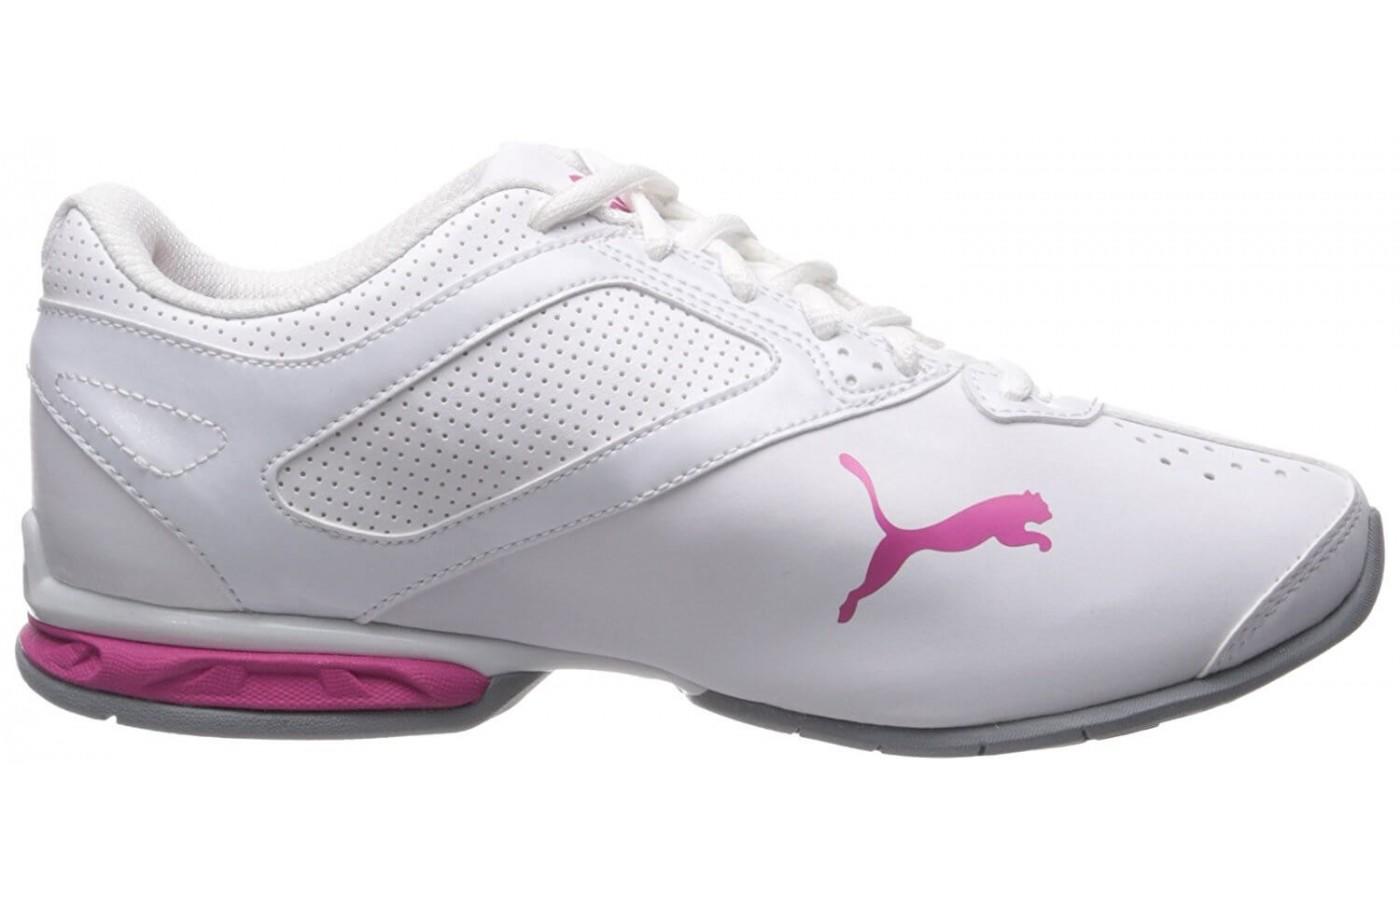 here is a look at the women's Tazon 6 in white